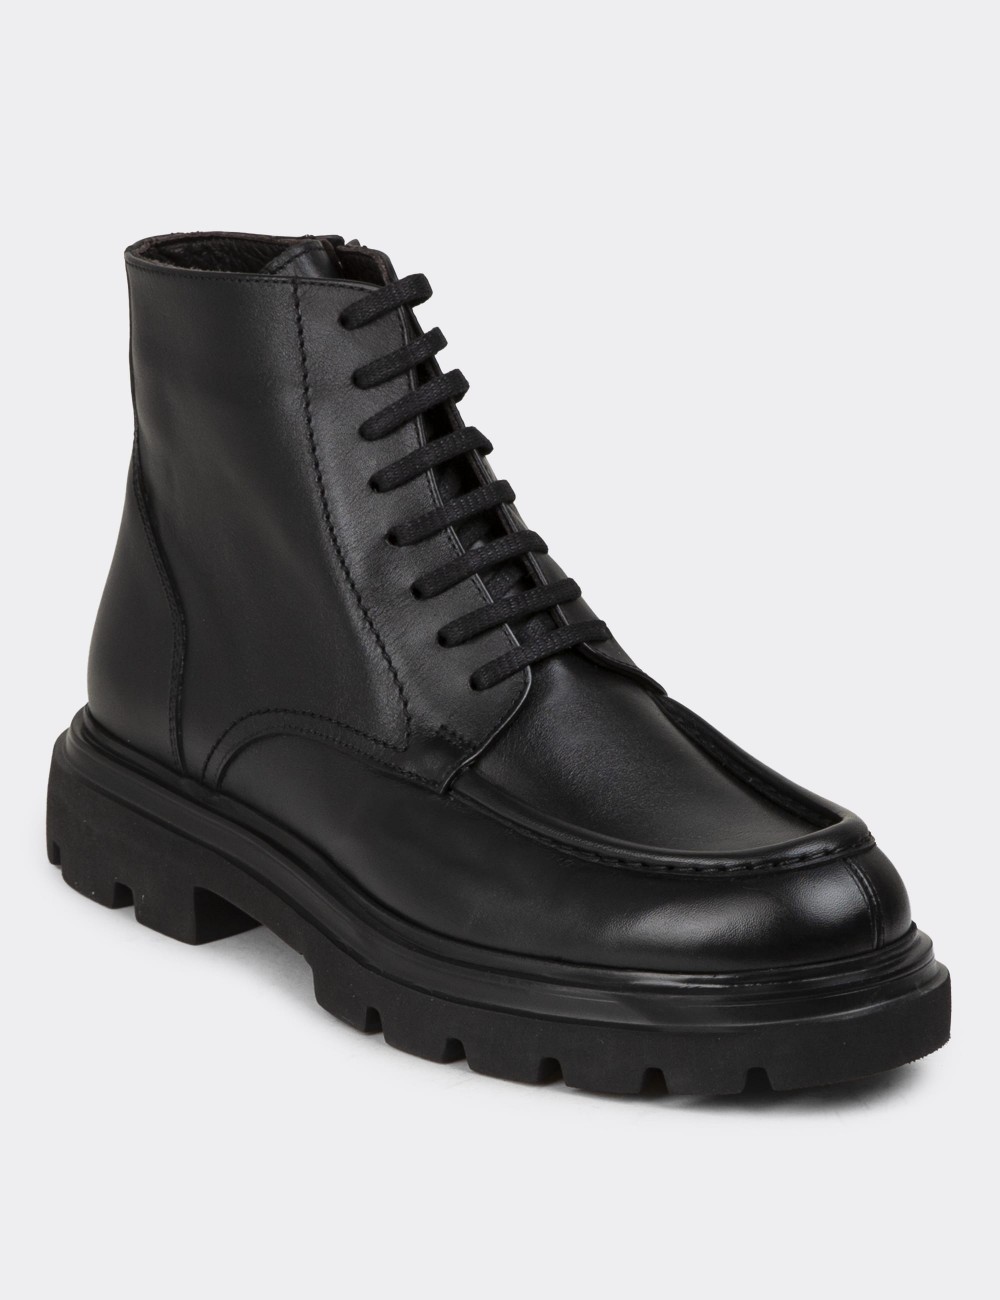 Black Leather Boots - 01979MSYHE01